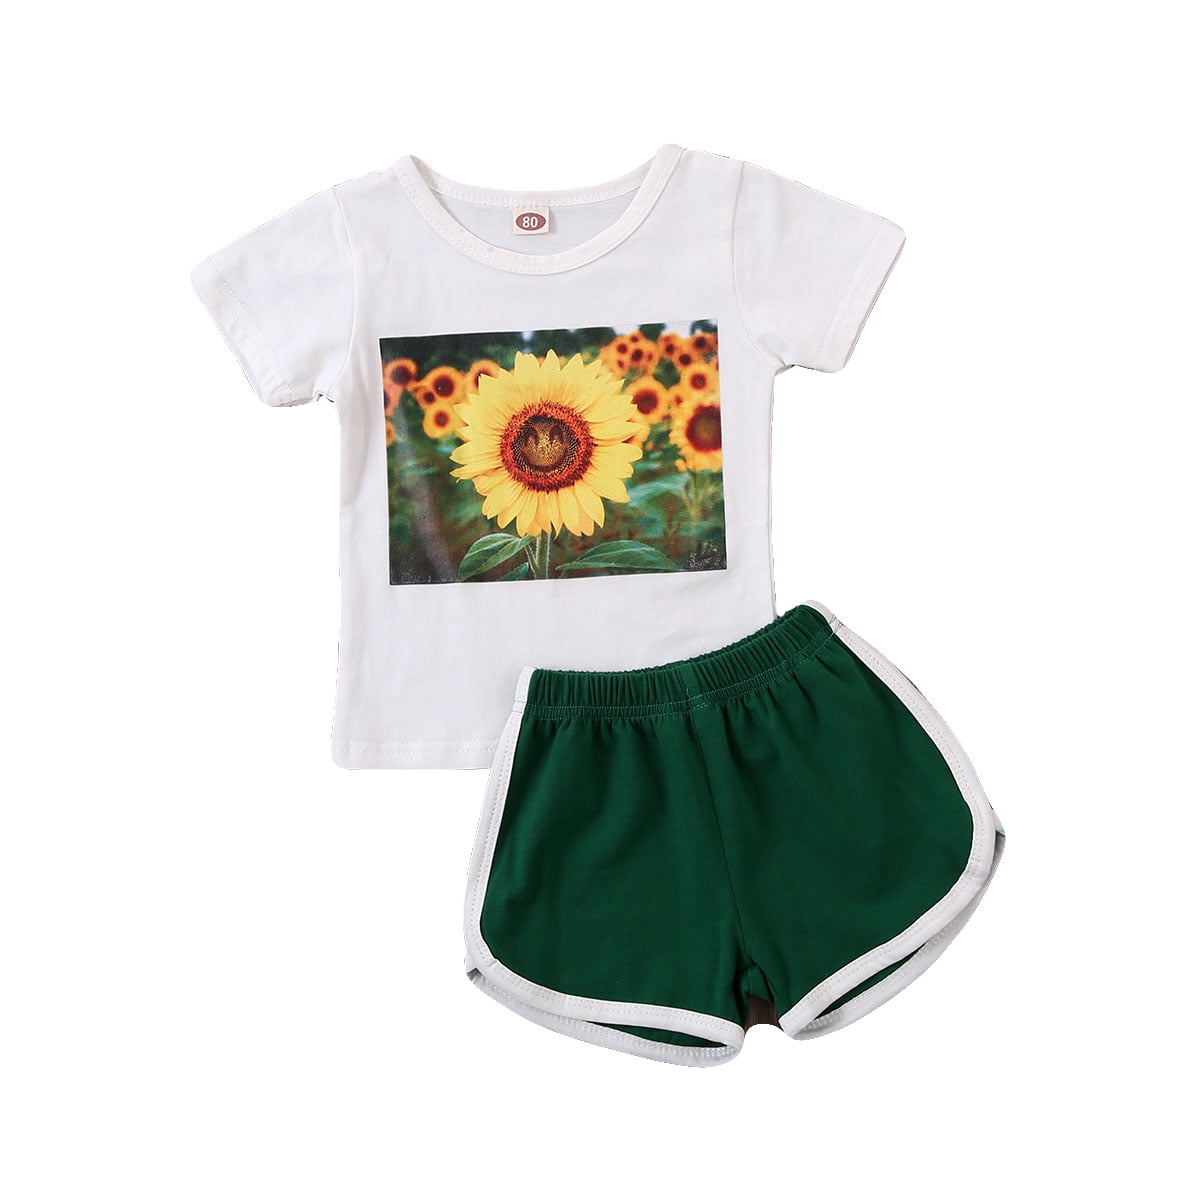 2PCS Children Kid Girl Sunflower Print Long Sleeved Top Clothes+Shorts Outfits X 